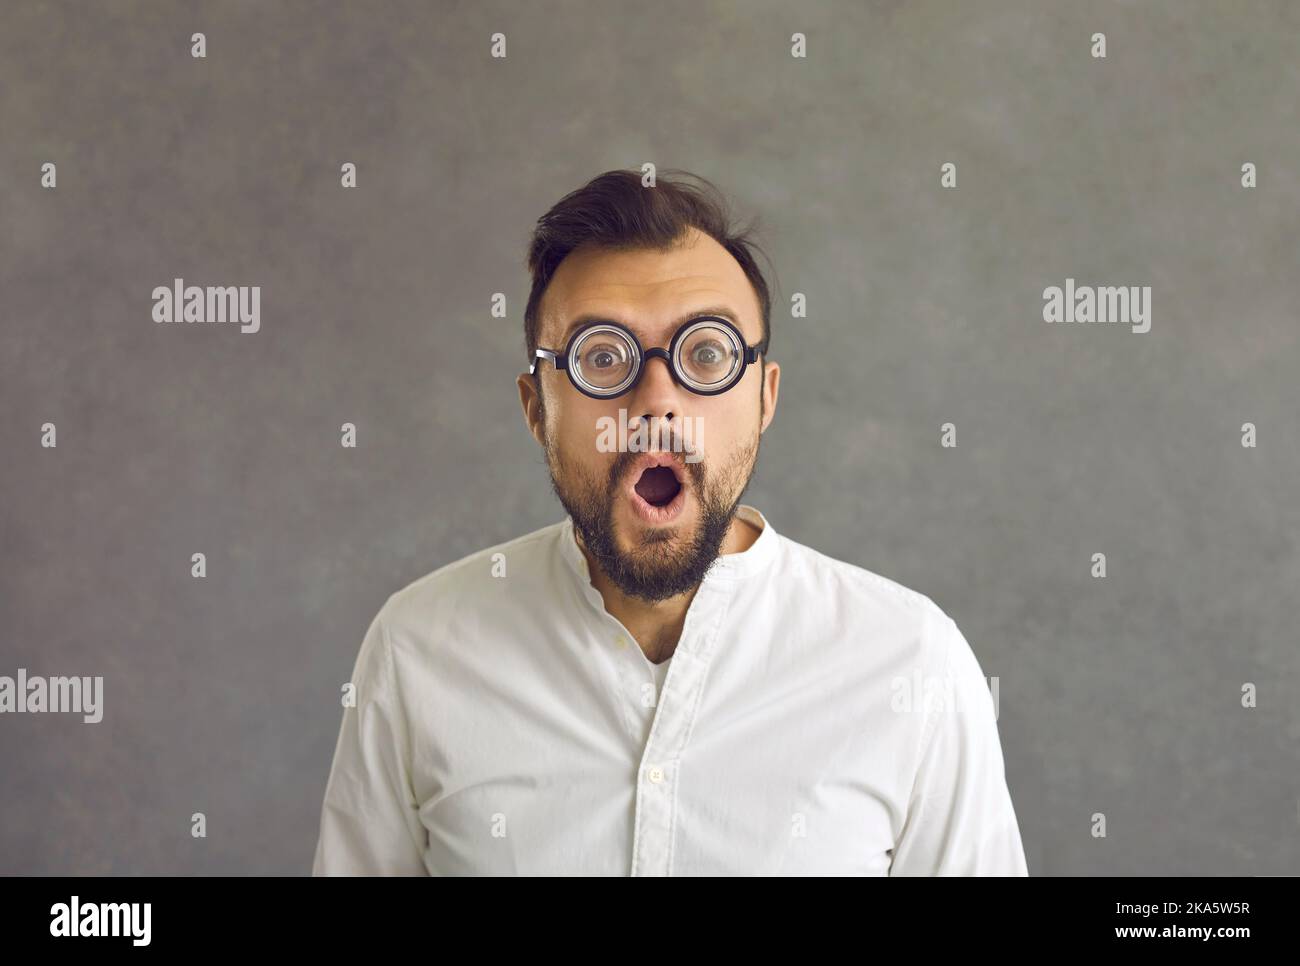 Portrait of funny shocked man round optical glasses standing on grey background Stock Photo